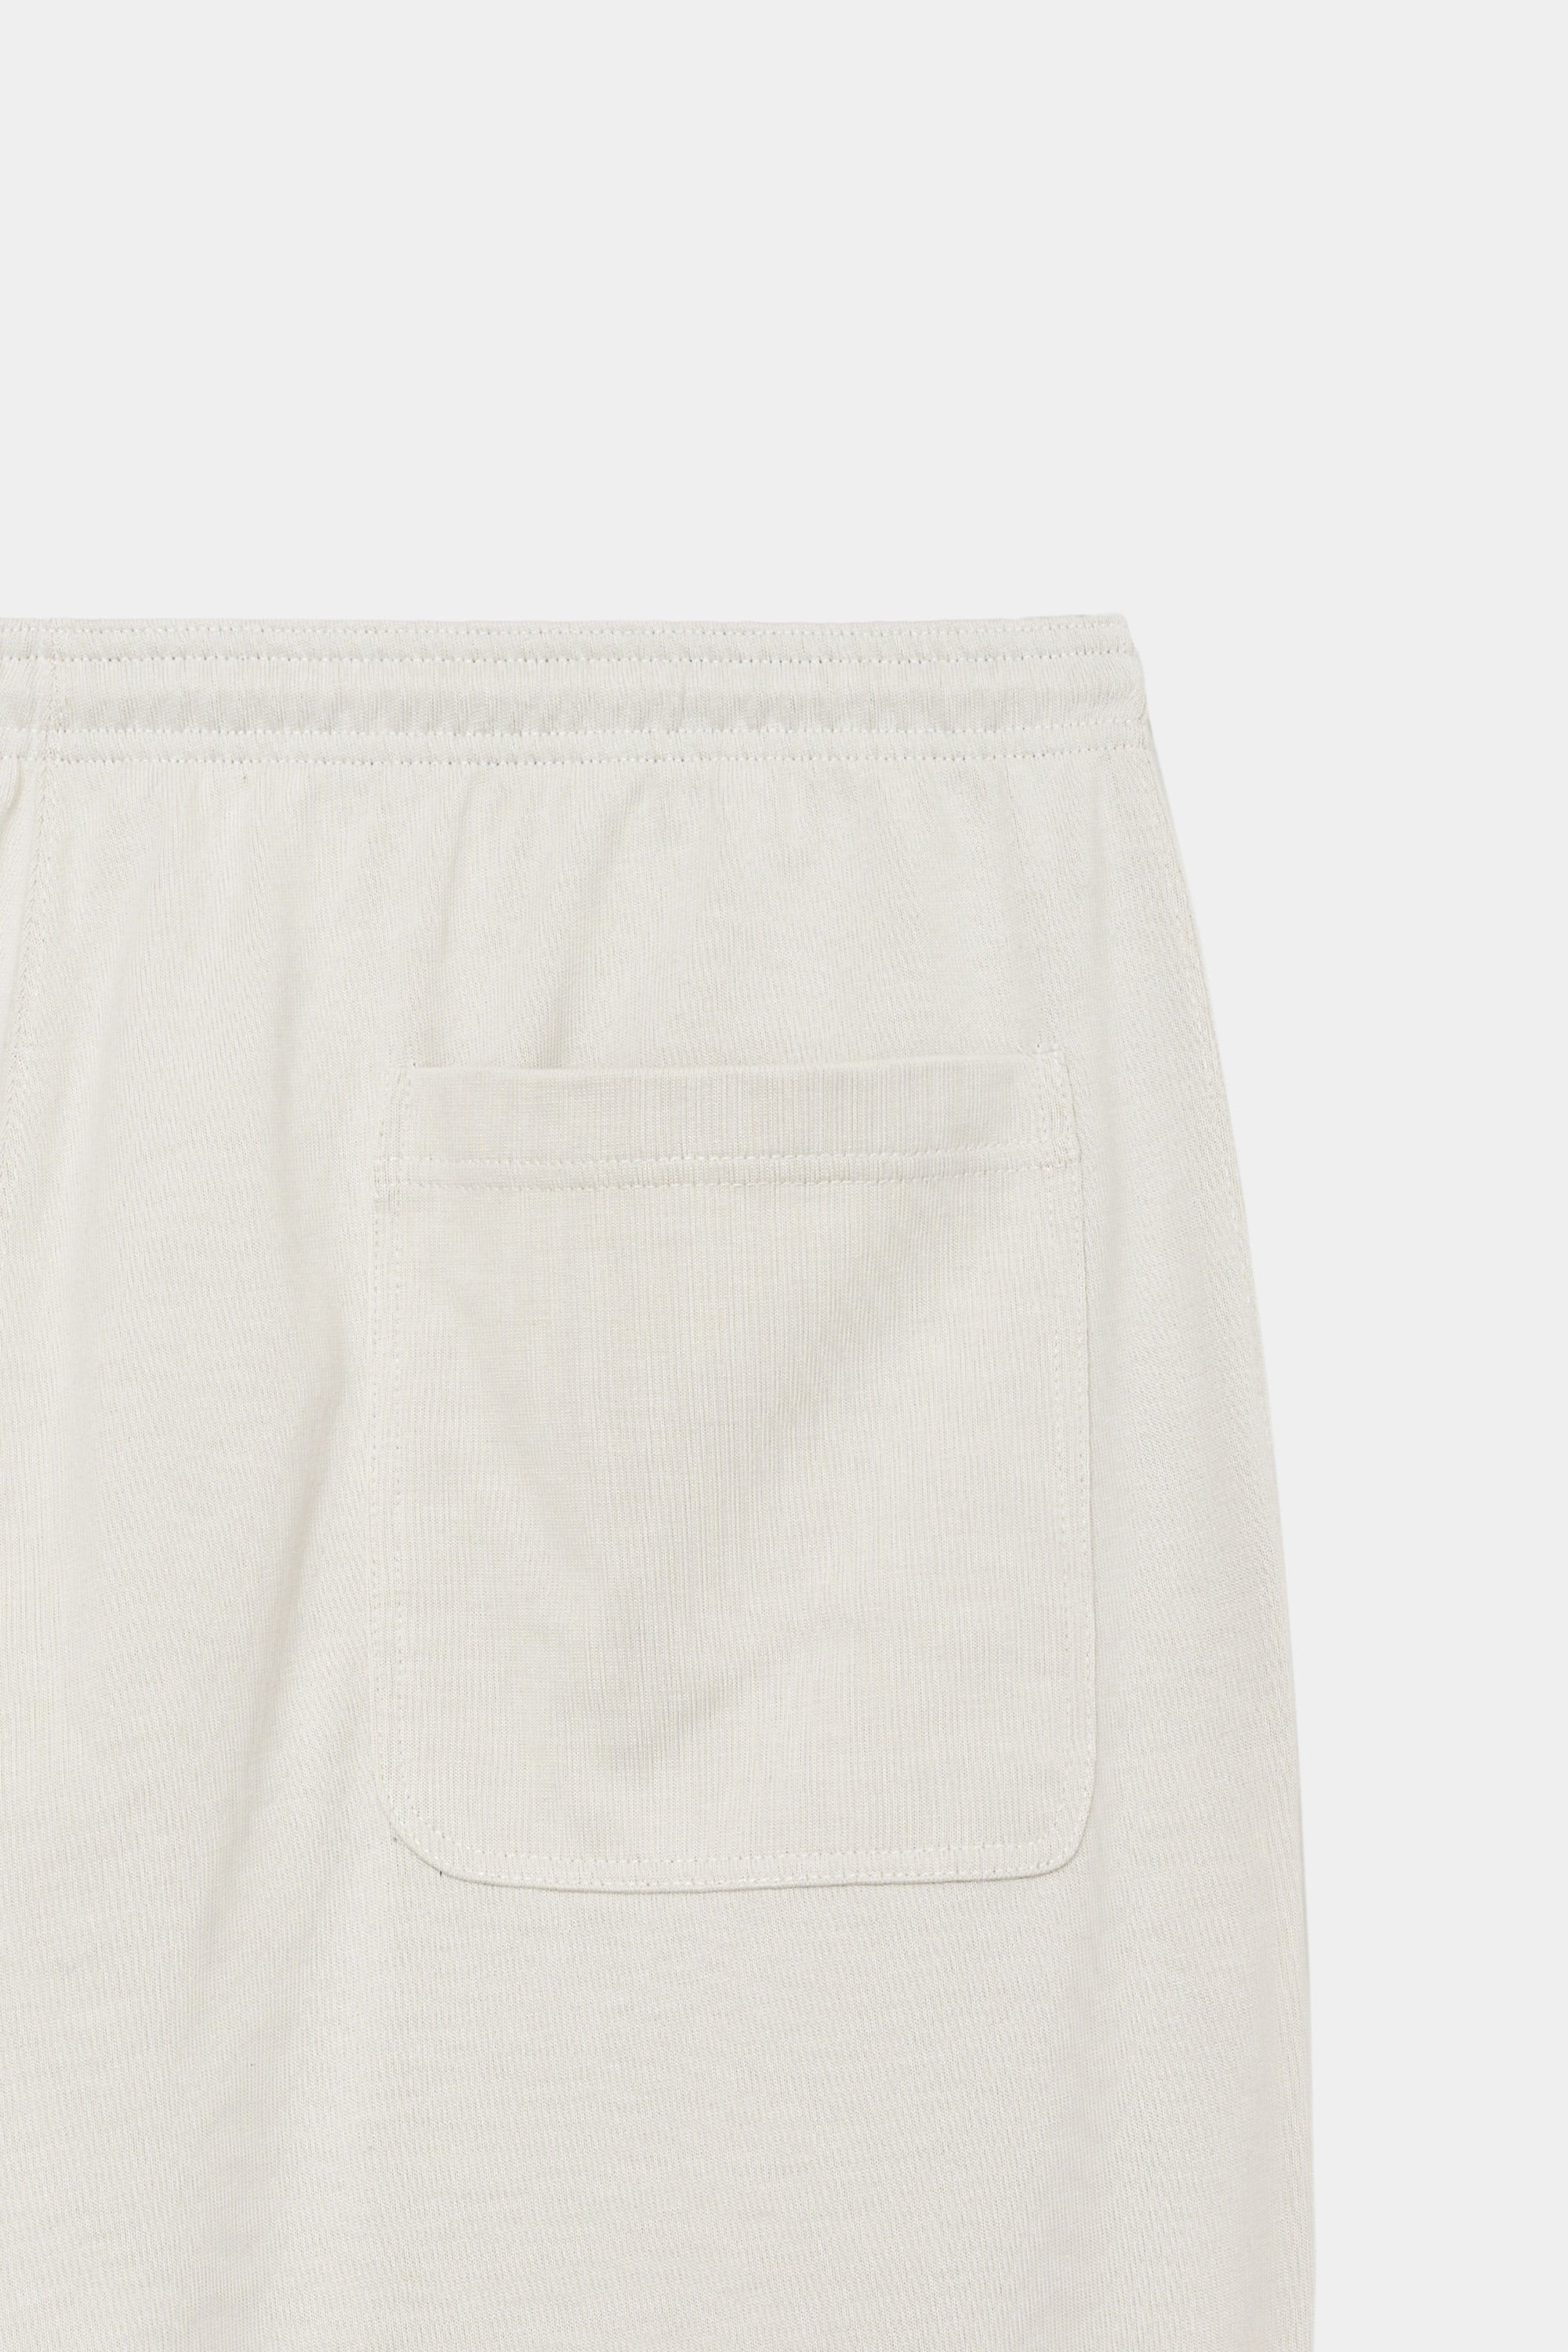 20//1 RECYCLE SUVIN ORGANIC COTTON KNIT EASY PANTS WIDE, Off White